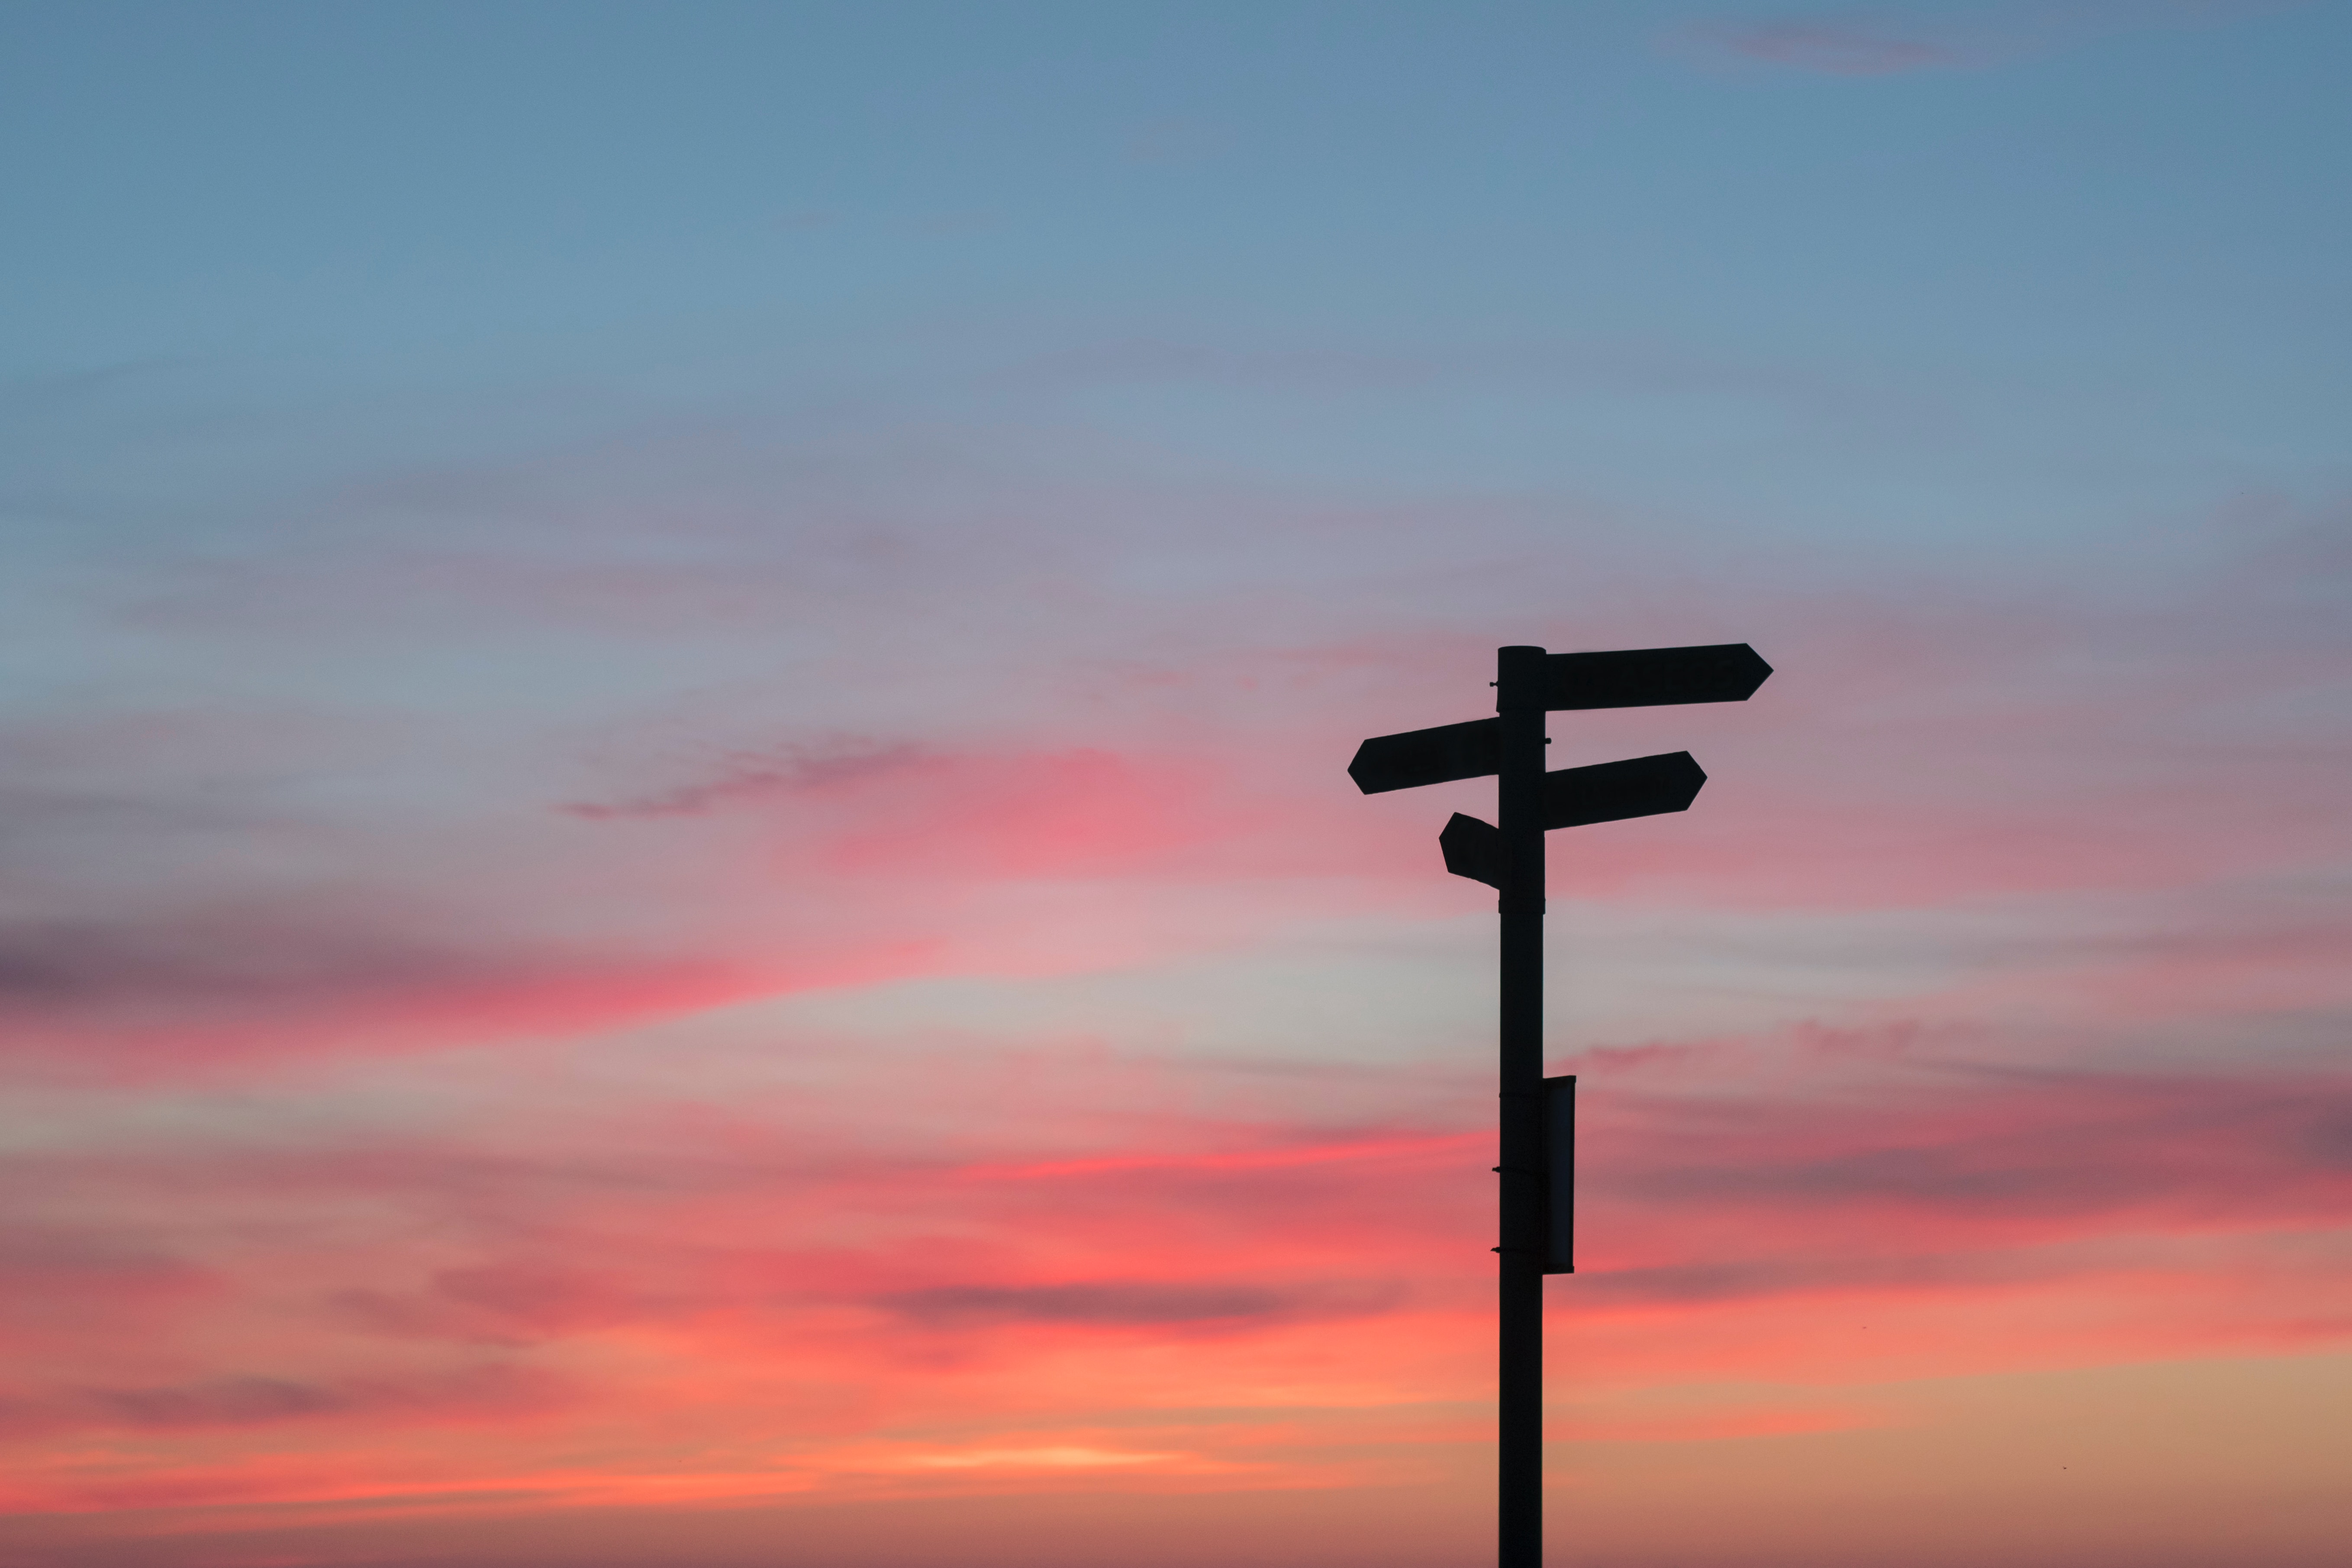 A photo of a sunset with the silhouette of a signpost